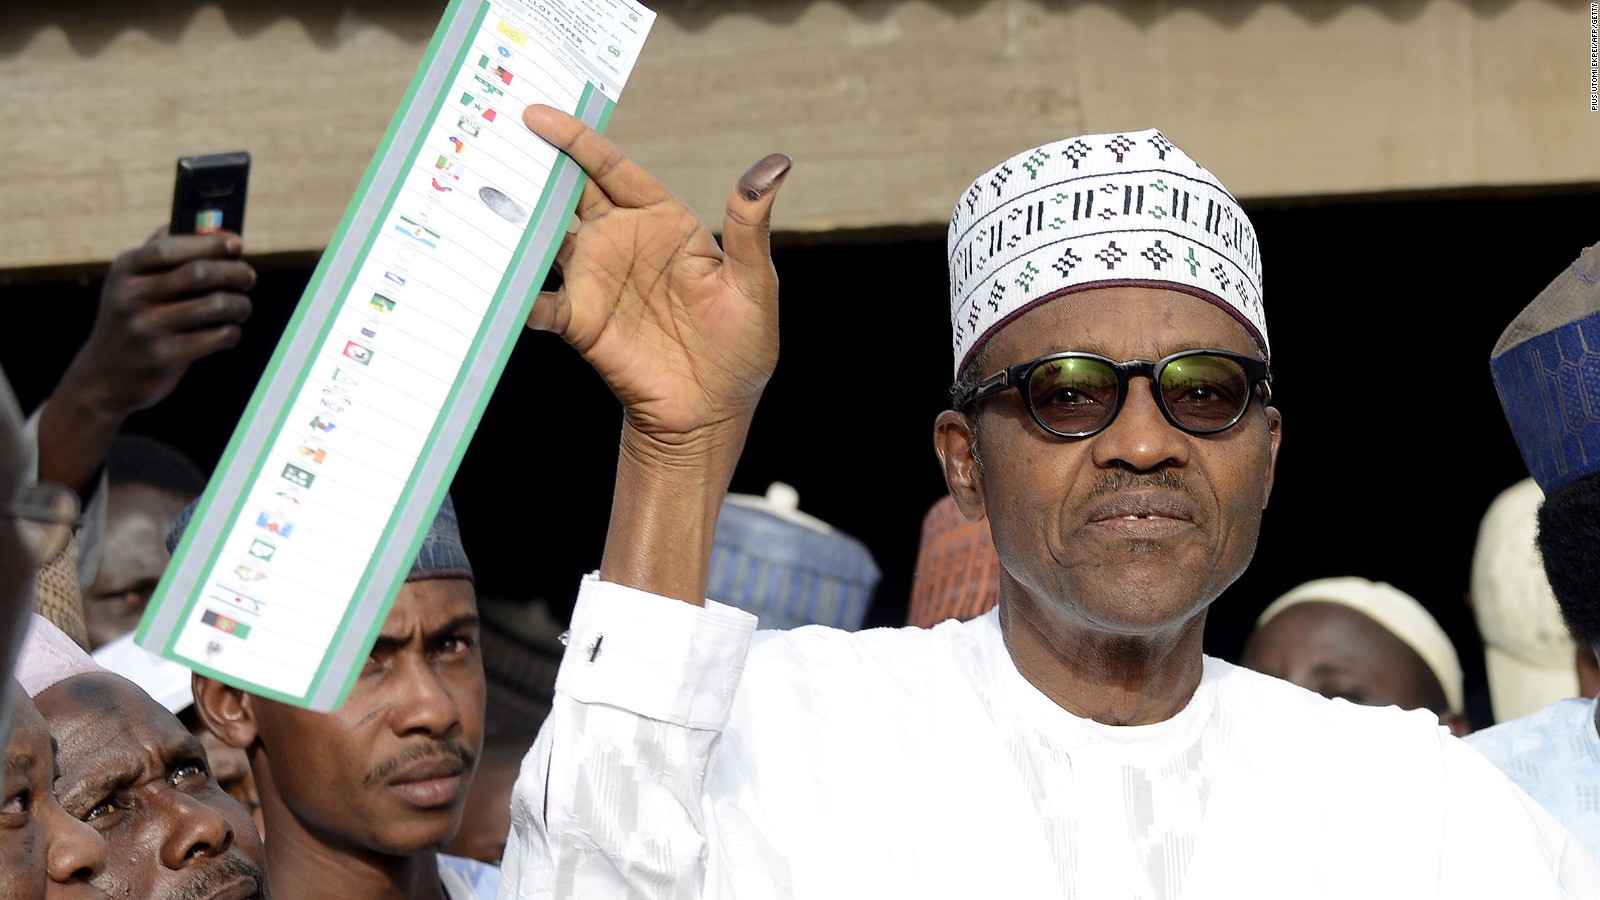 5 Startup Lessons From The Buhari Campaign Cnn